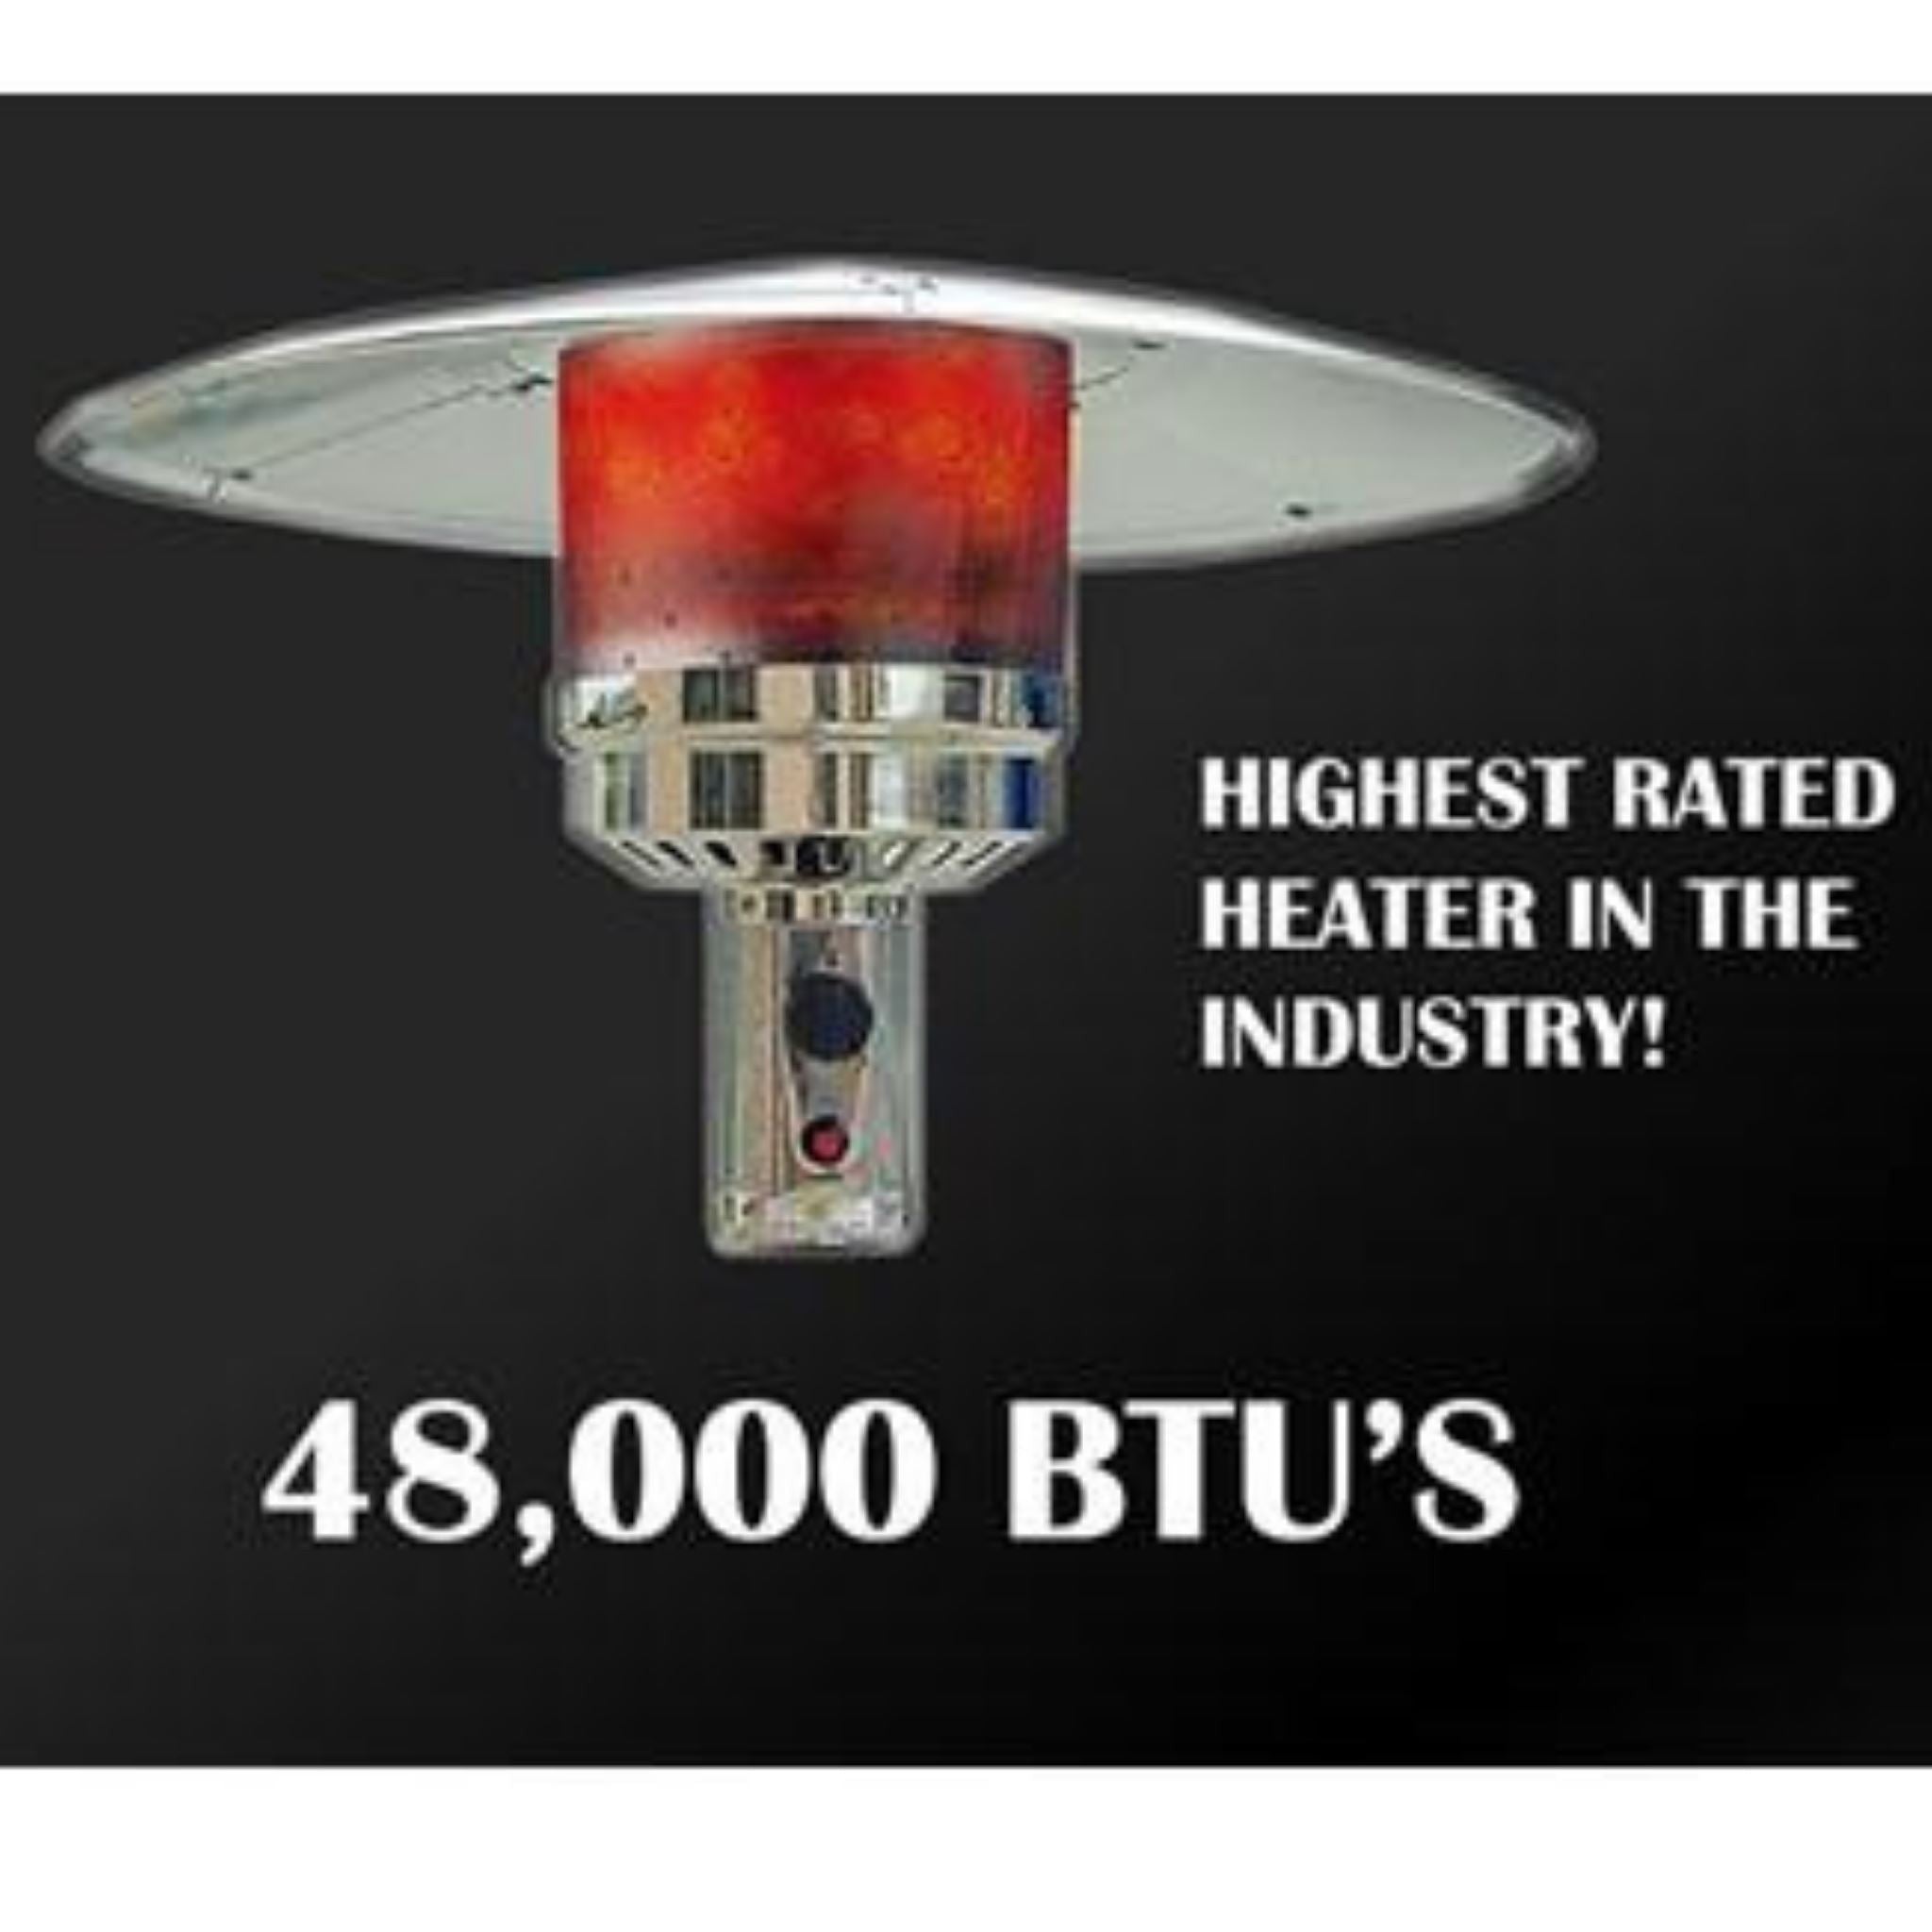 AZ Patio Heater 87" Two Tone Outdoor Patio Heater with Table- 48000 BTU's, Highest rated in the industry